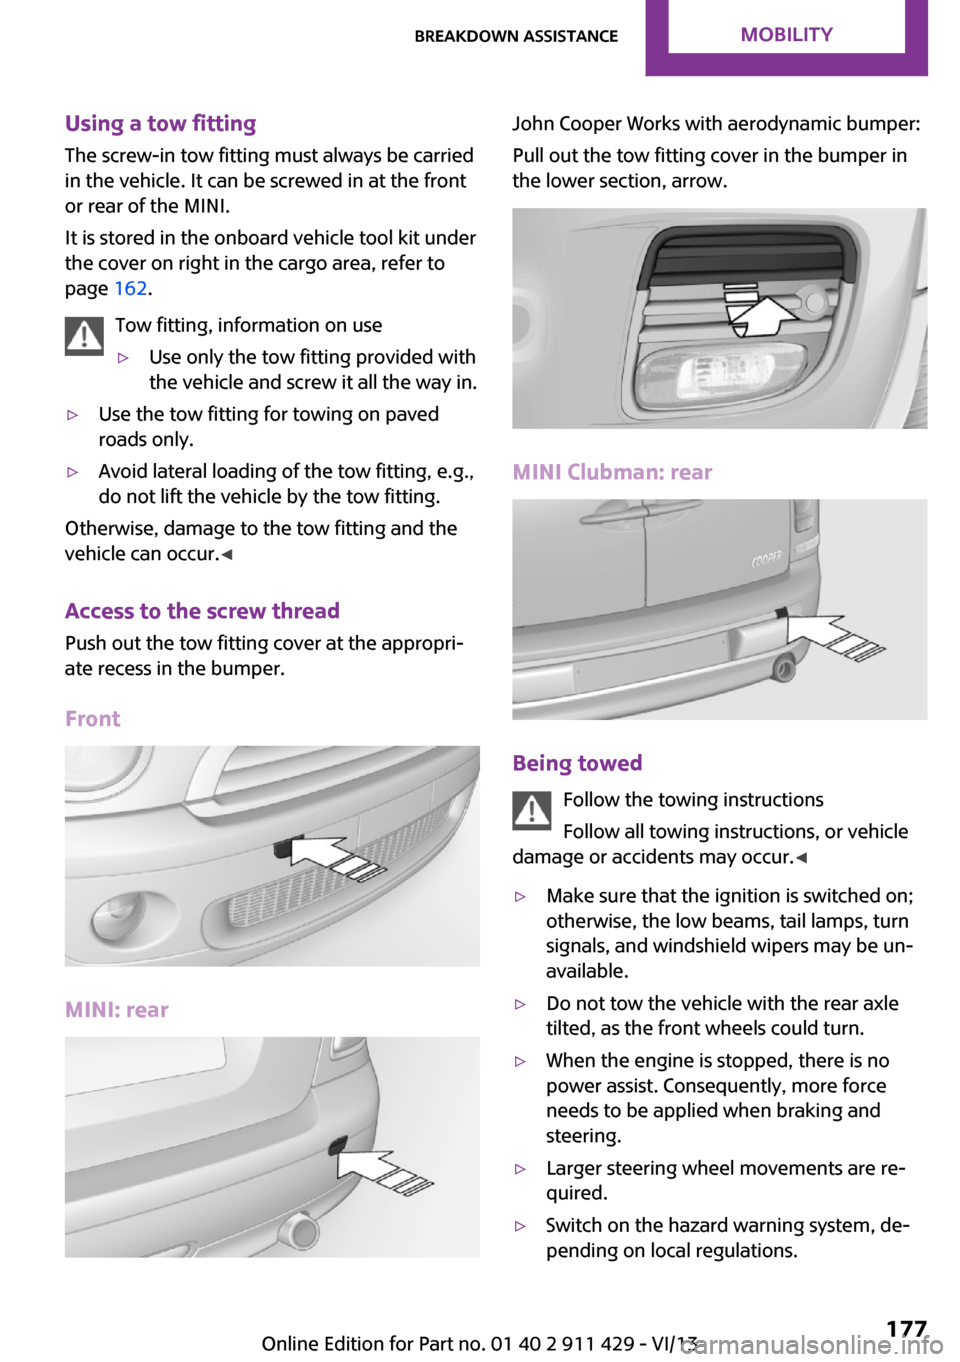 MINI Clubman 2014  Owners Manual Using a tow fittingThe screw-in tow fitting must always be carried
in the vehicle. It can be screwed in at the front
or rear of the MINI.
It is stored in the onboard vehicle tool kit under
the cover o